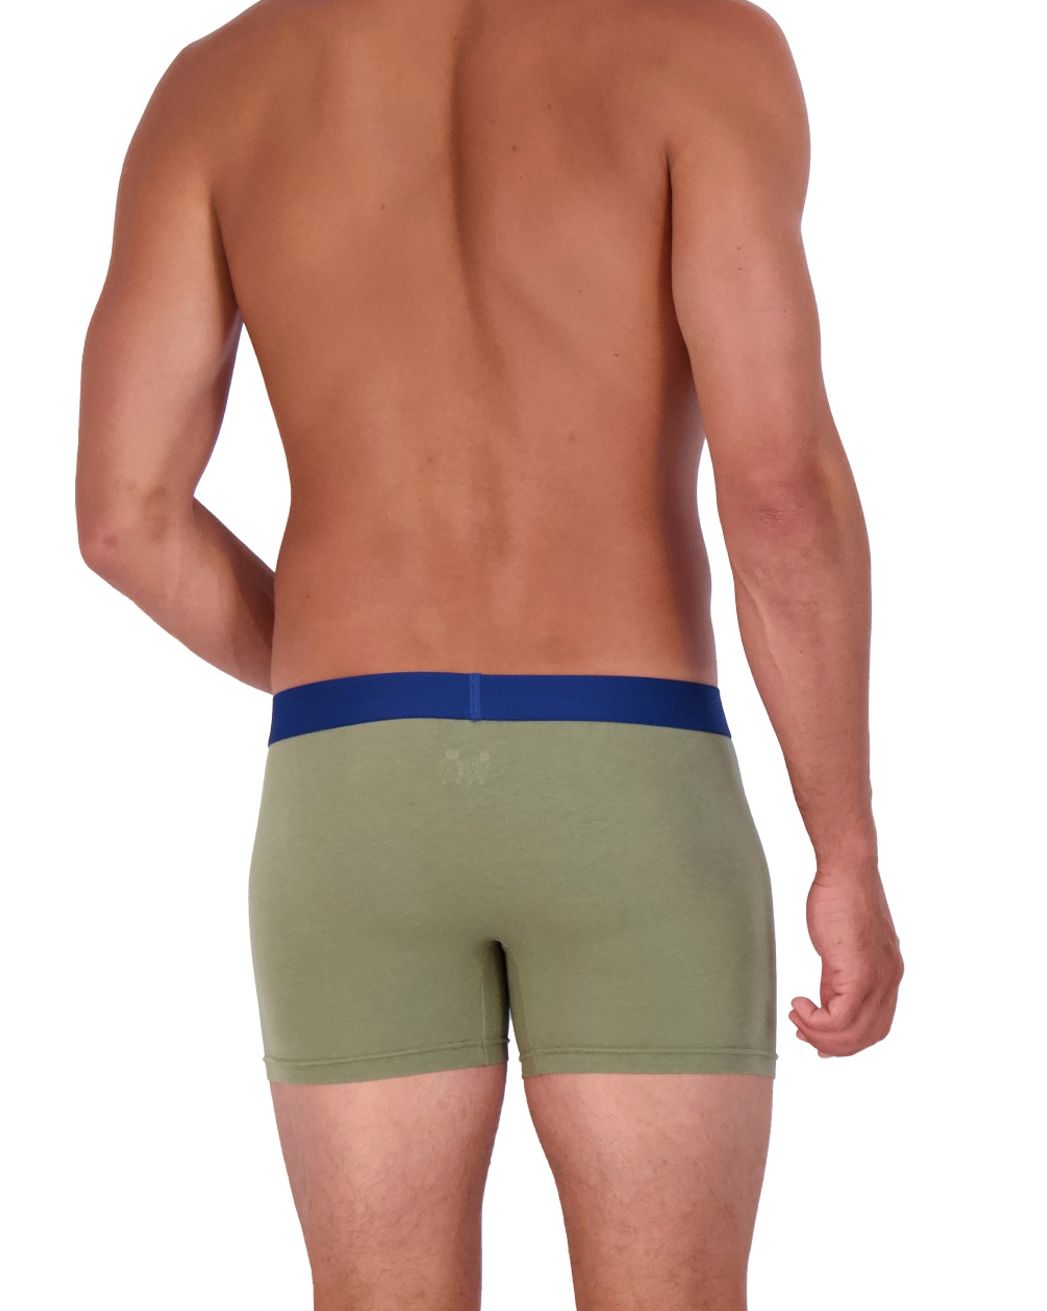 Boxer Brief w/ Fly in Olive by Wood Underwear